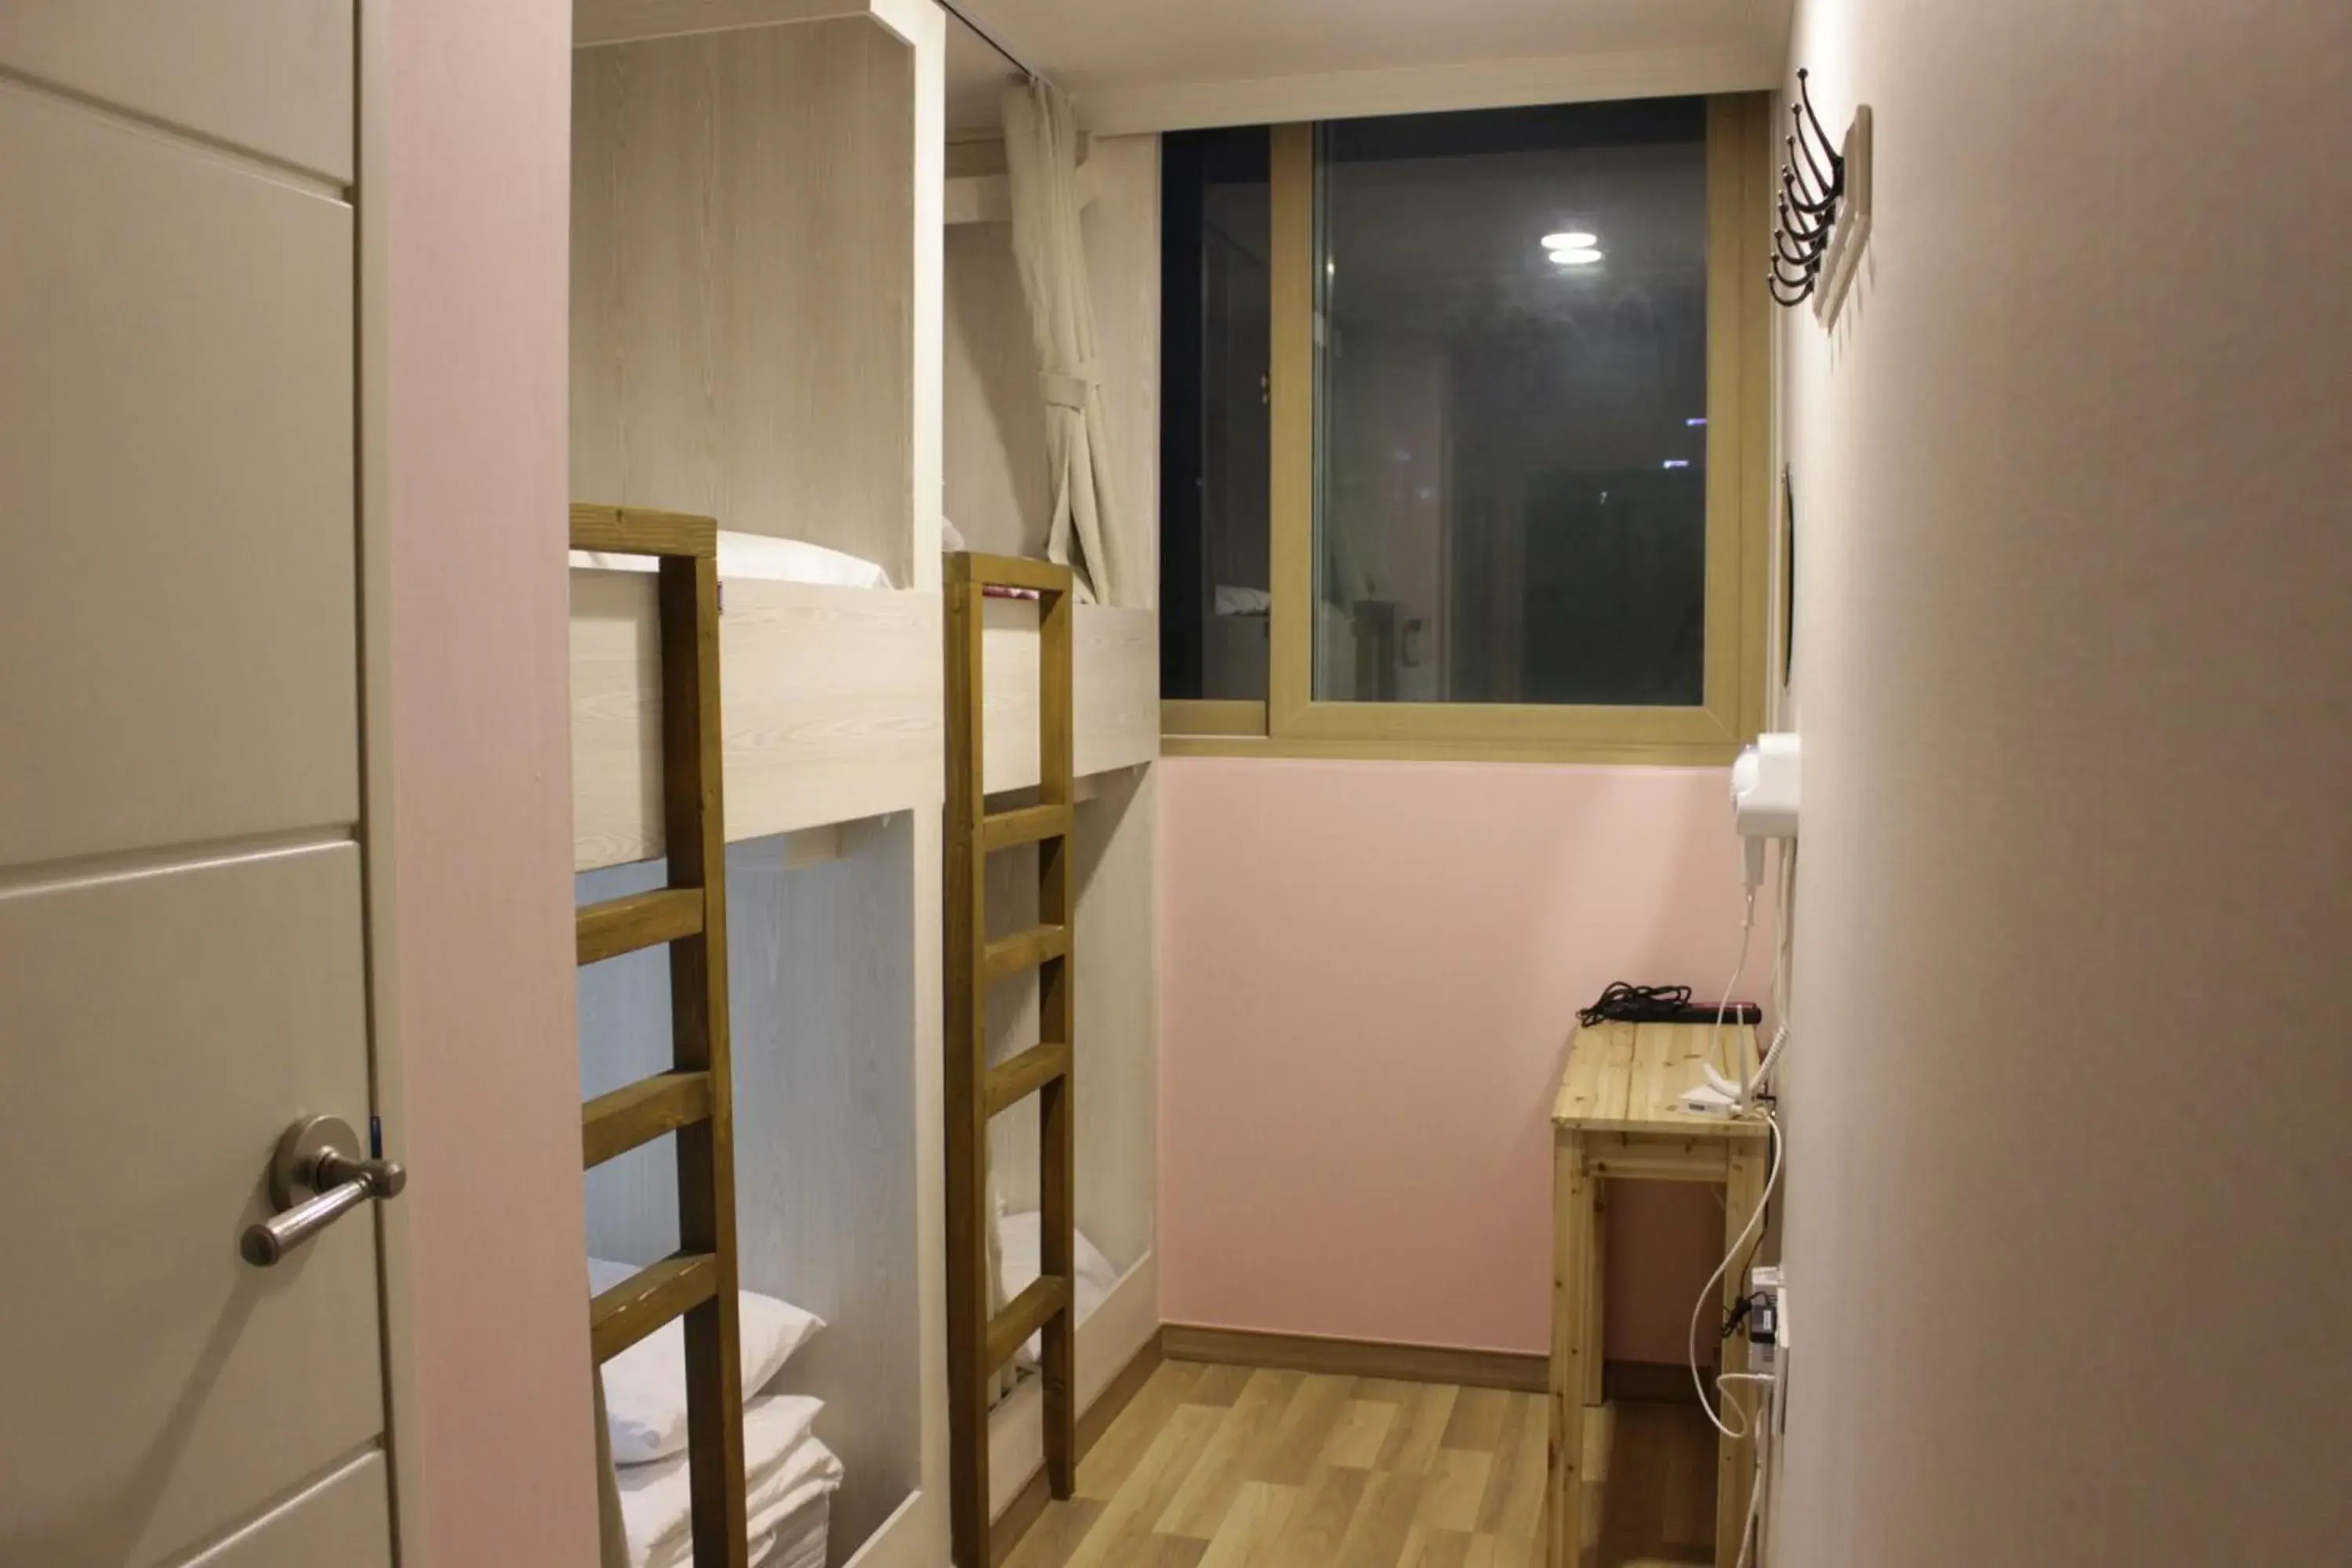 4-Bed Dormitory Room with Private Bathroom in Bexco Hostel B&B